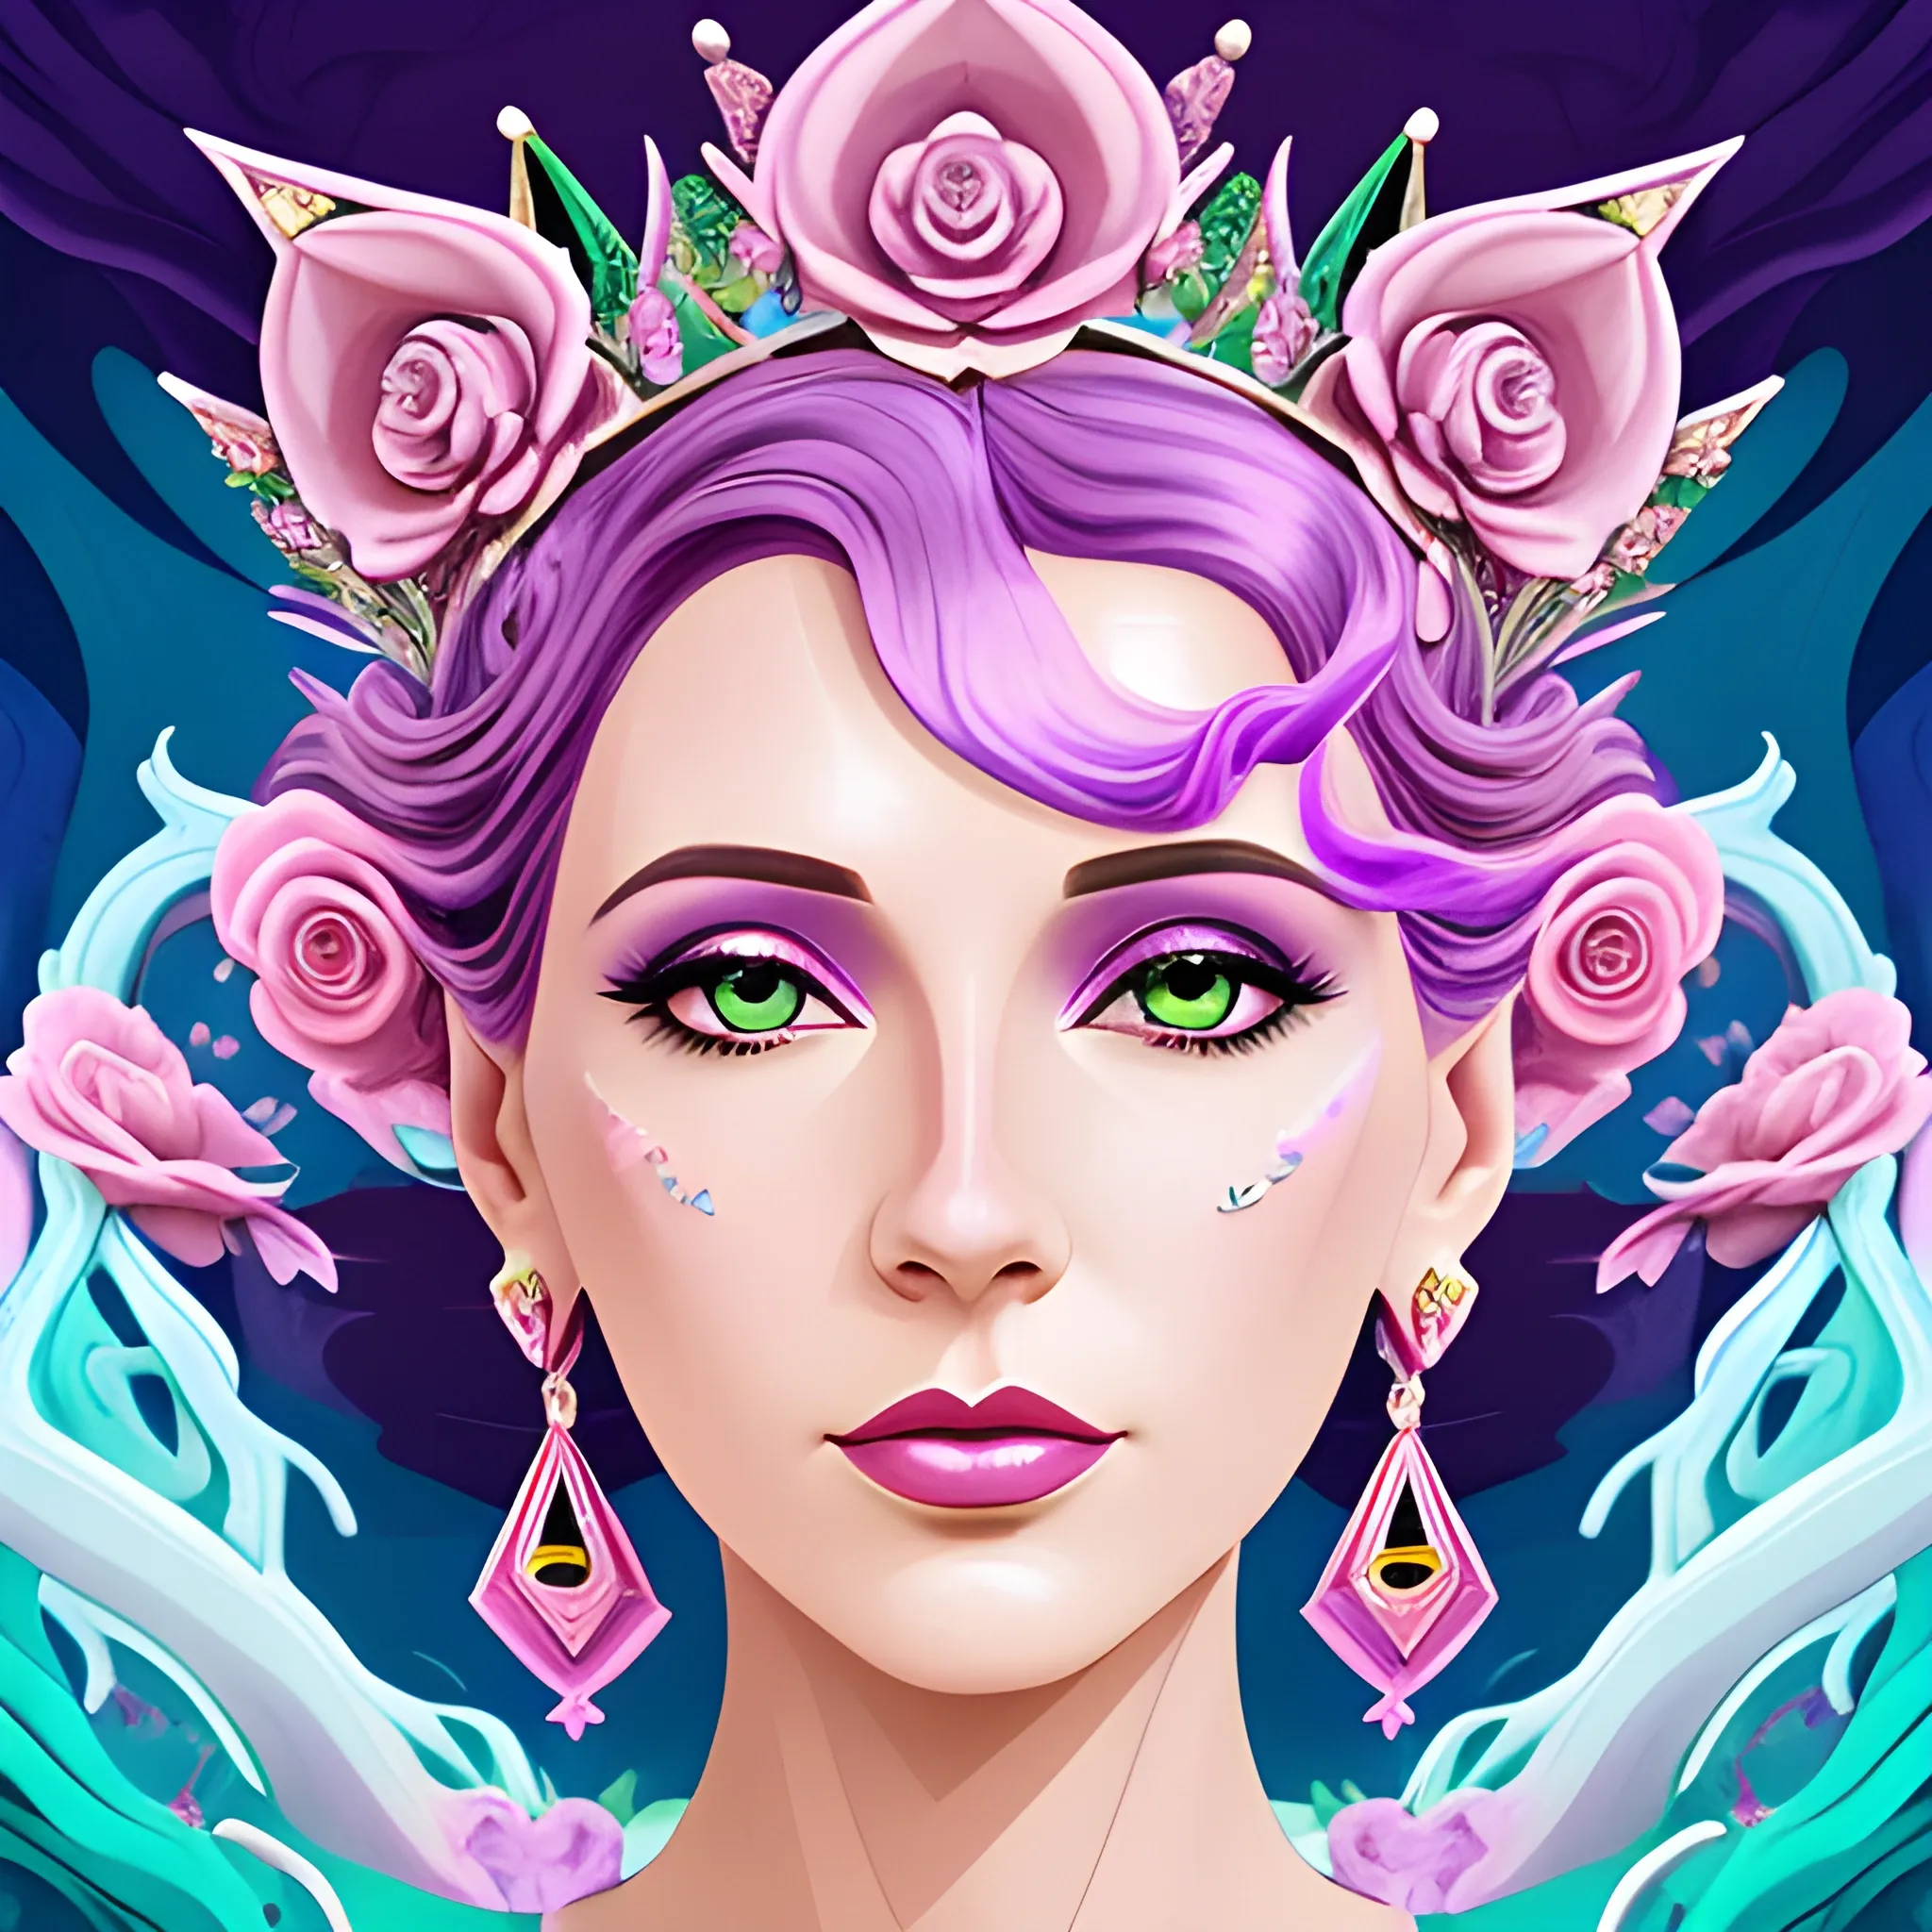 Close up of Woman purple wearing pink, art deco, earrings, bejeweled crown of roses, pink hair, purple eyes, digital illustration style, otherworldly landscape with floating islands, cascading streams and vibrant flora and fauna. Very detailed and high quality, 3D, Water Color